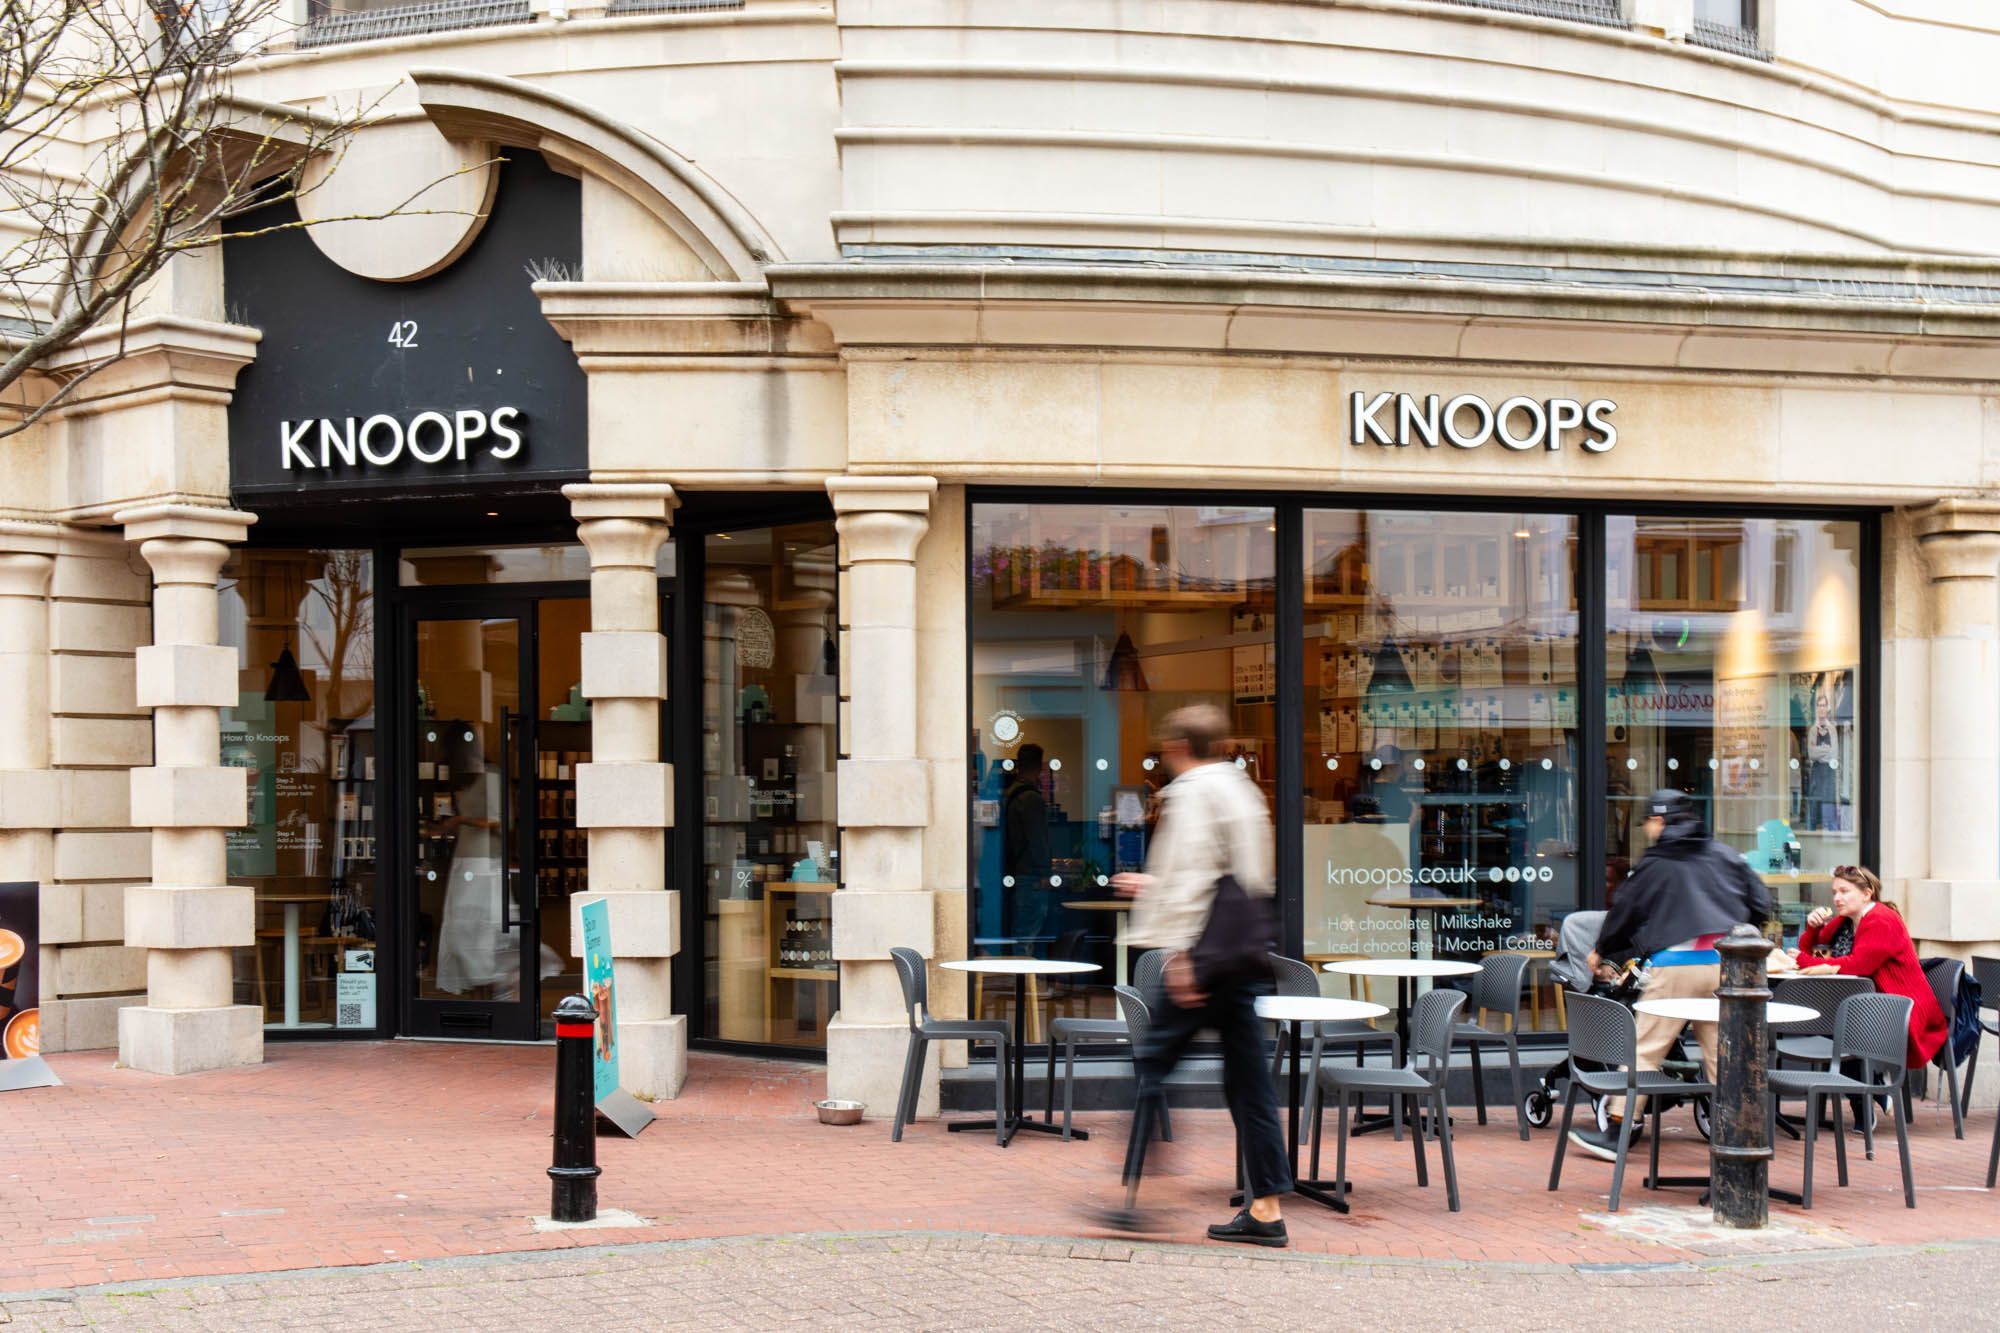 exterior shot of the Knoops Brighton building located in the Lanes, people walking by and some sitting outside